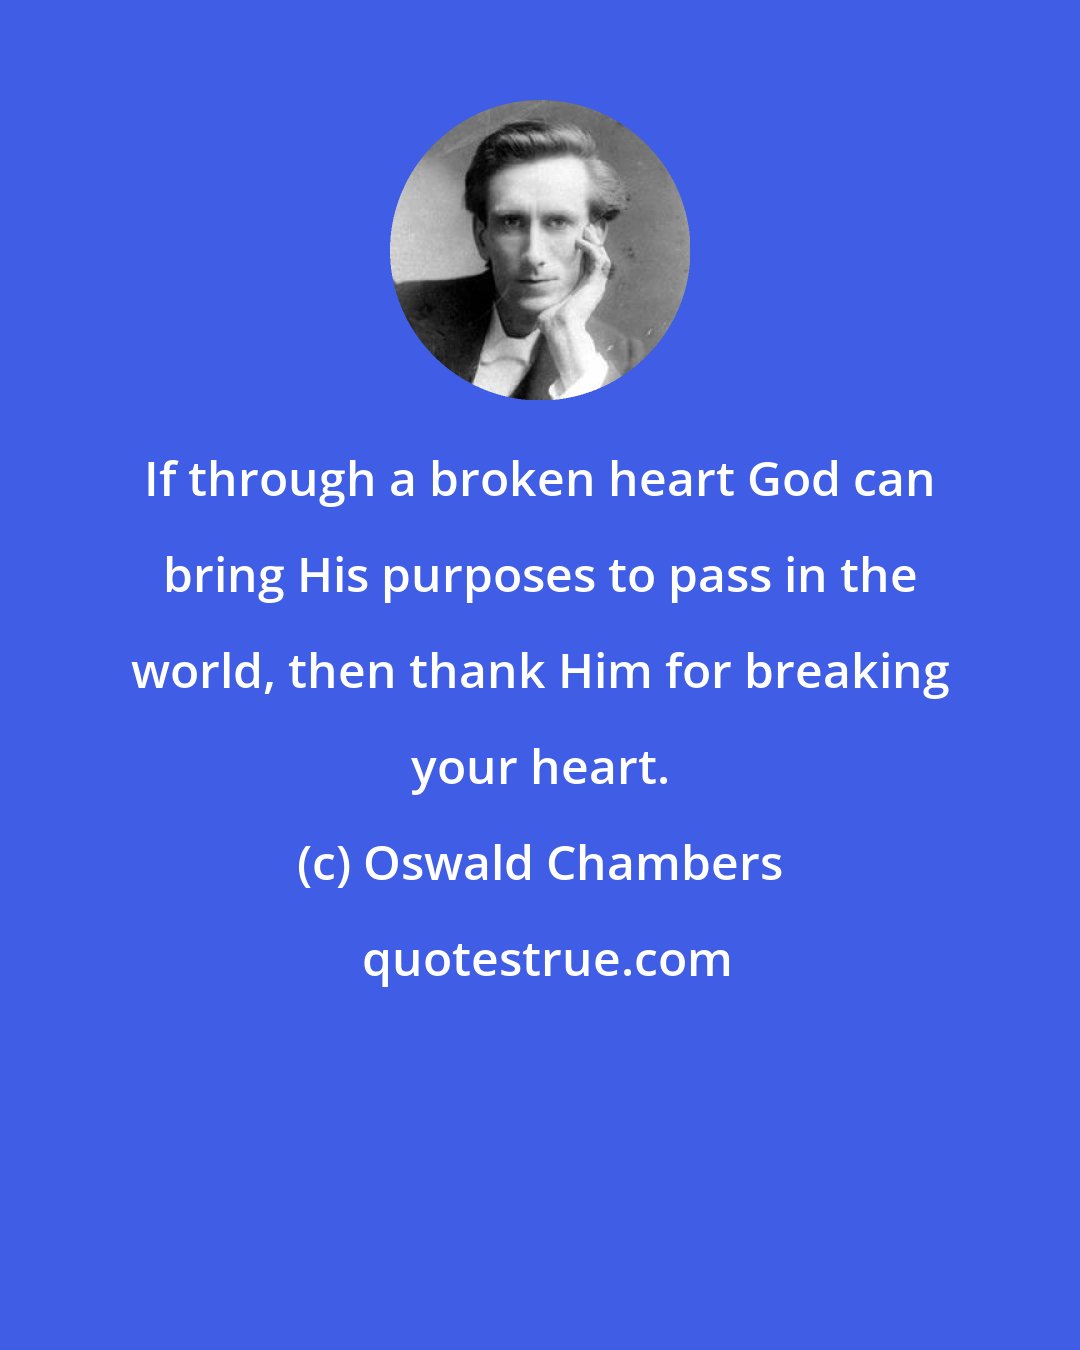 Oswald Chambers: If through a broken heart God can bring His purposes to pass in the world, then thank Him for breaking your heart.